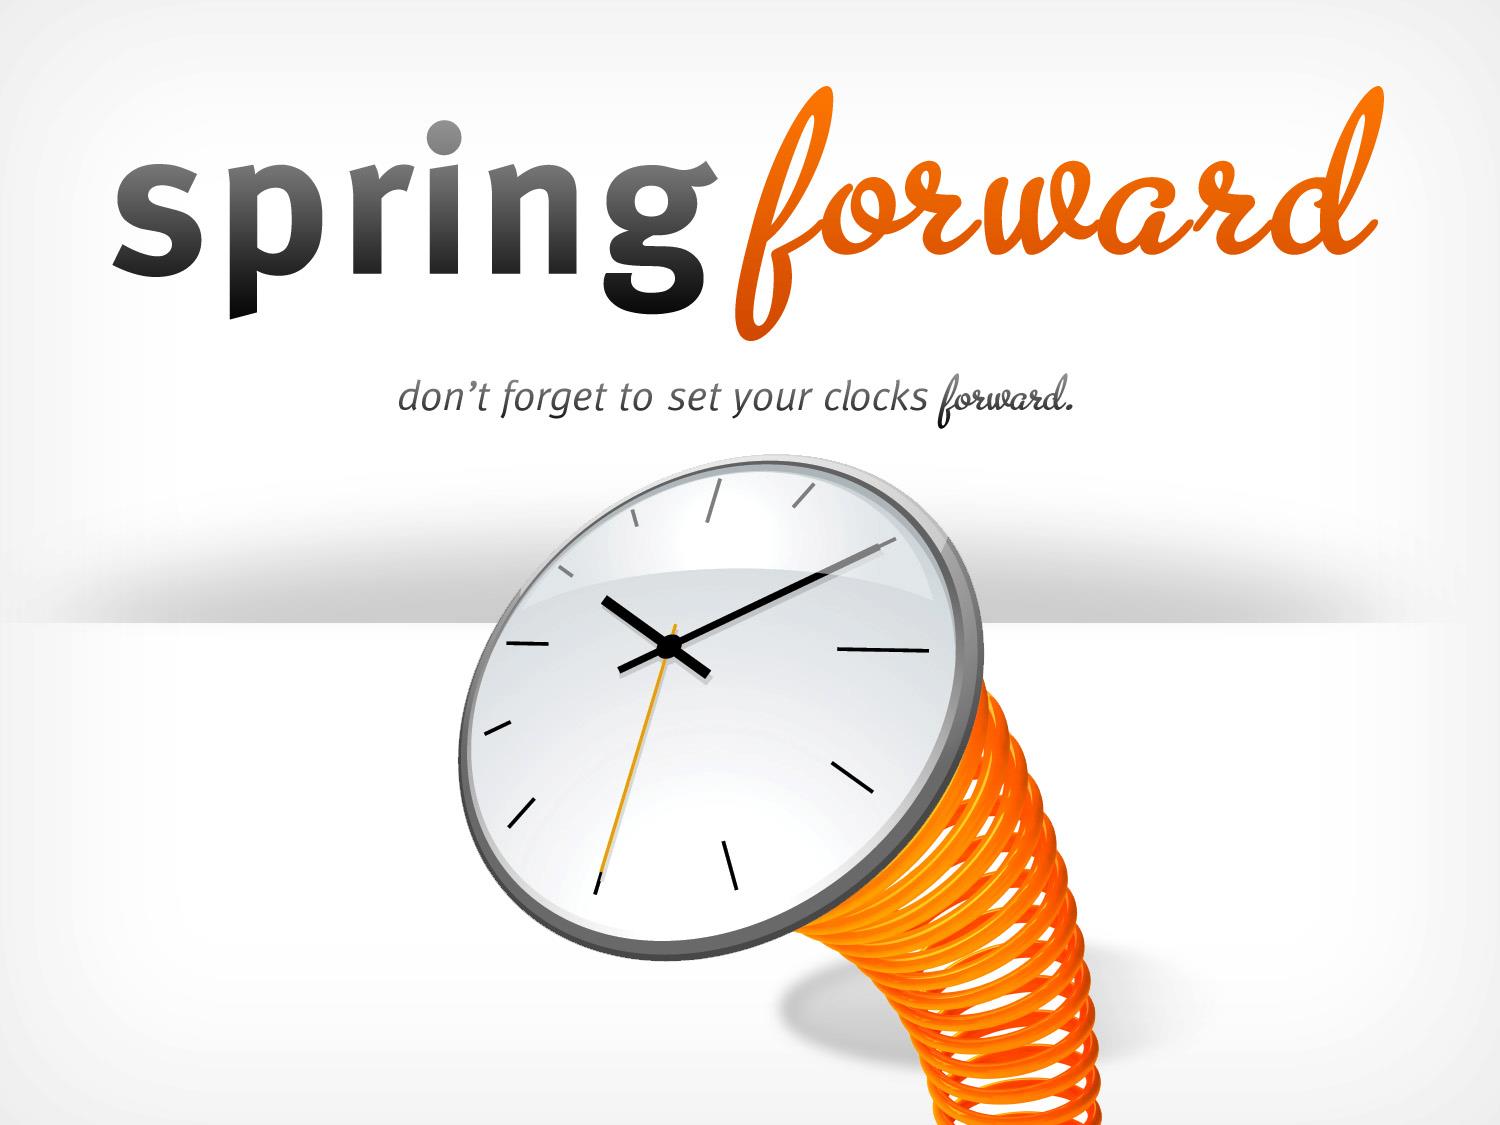 Don’t forget…set your clocks ahead 1 hour Saturday night!